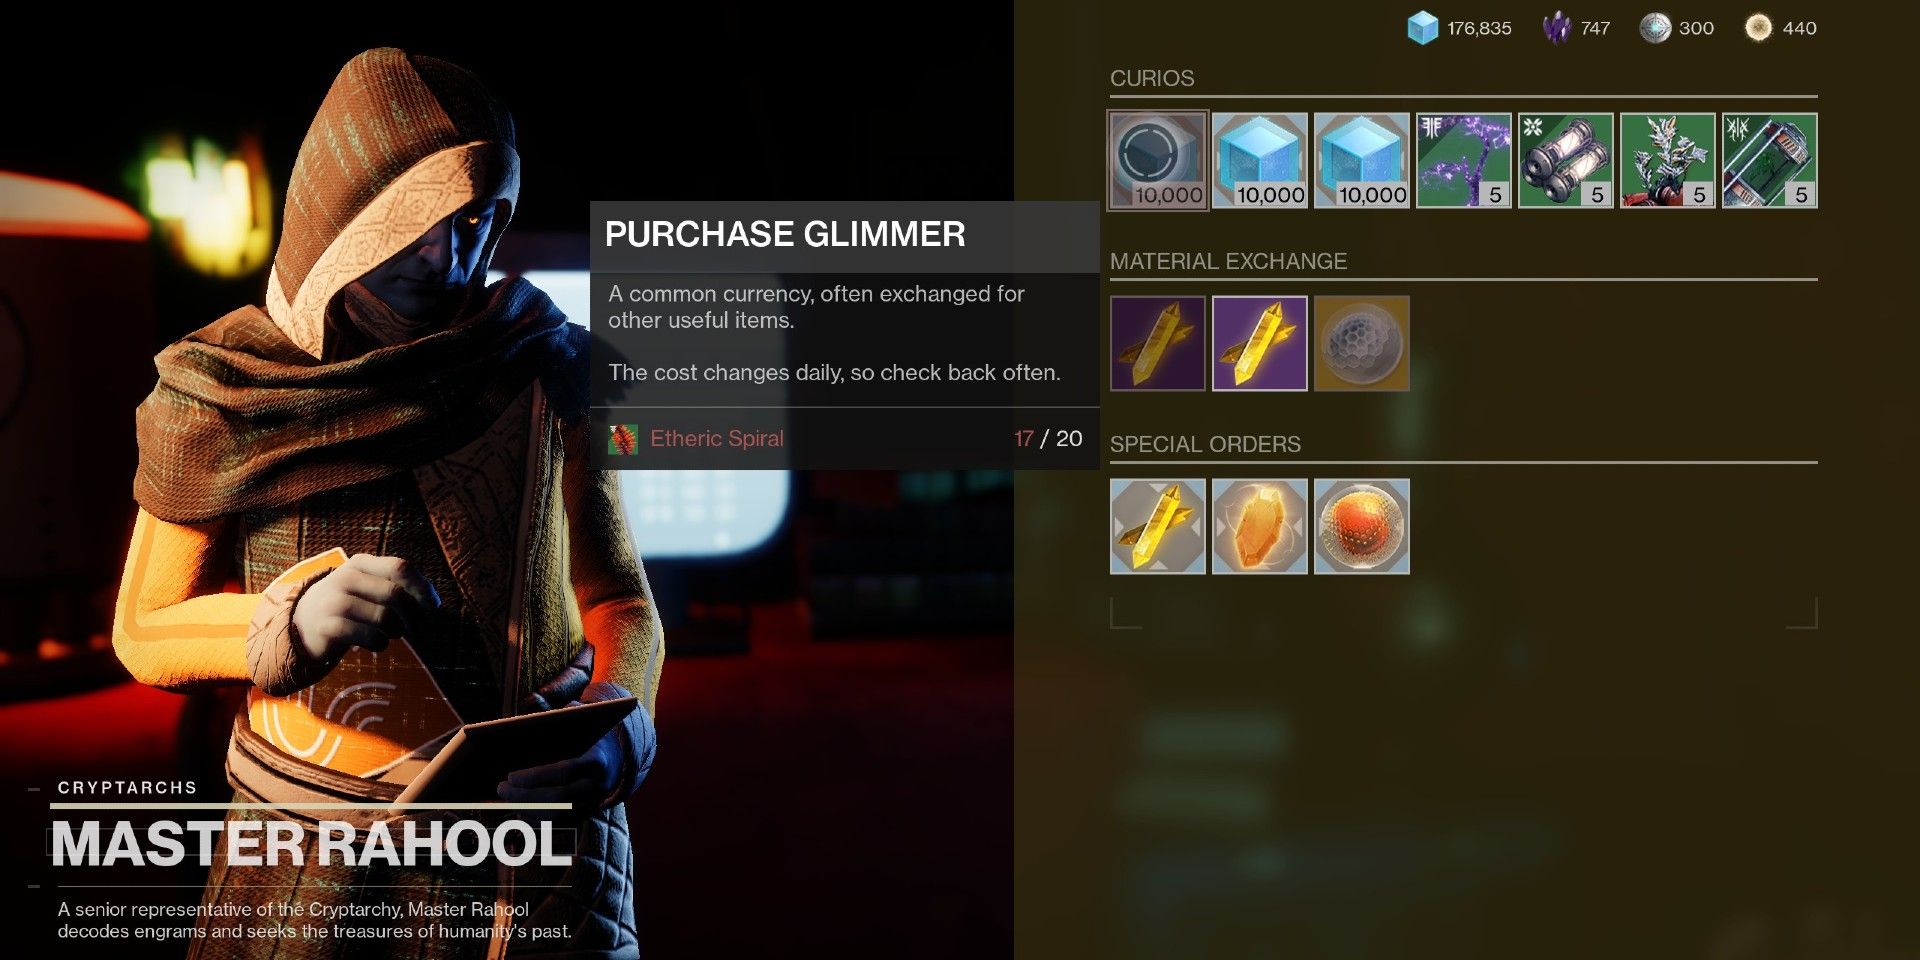 Exchange 20 Etheric Spiral For 10000 Glimmer With Master Rahool